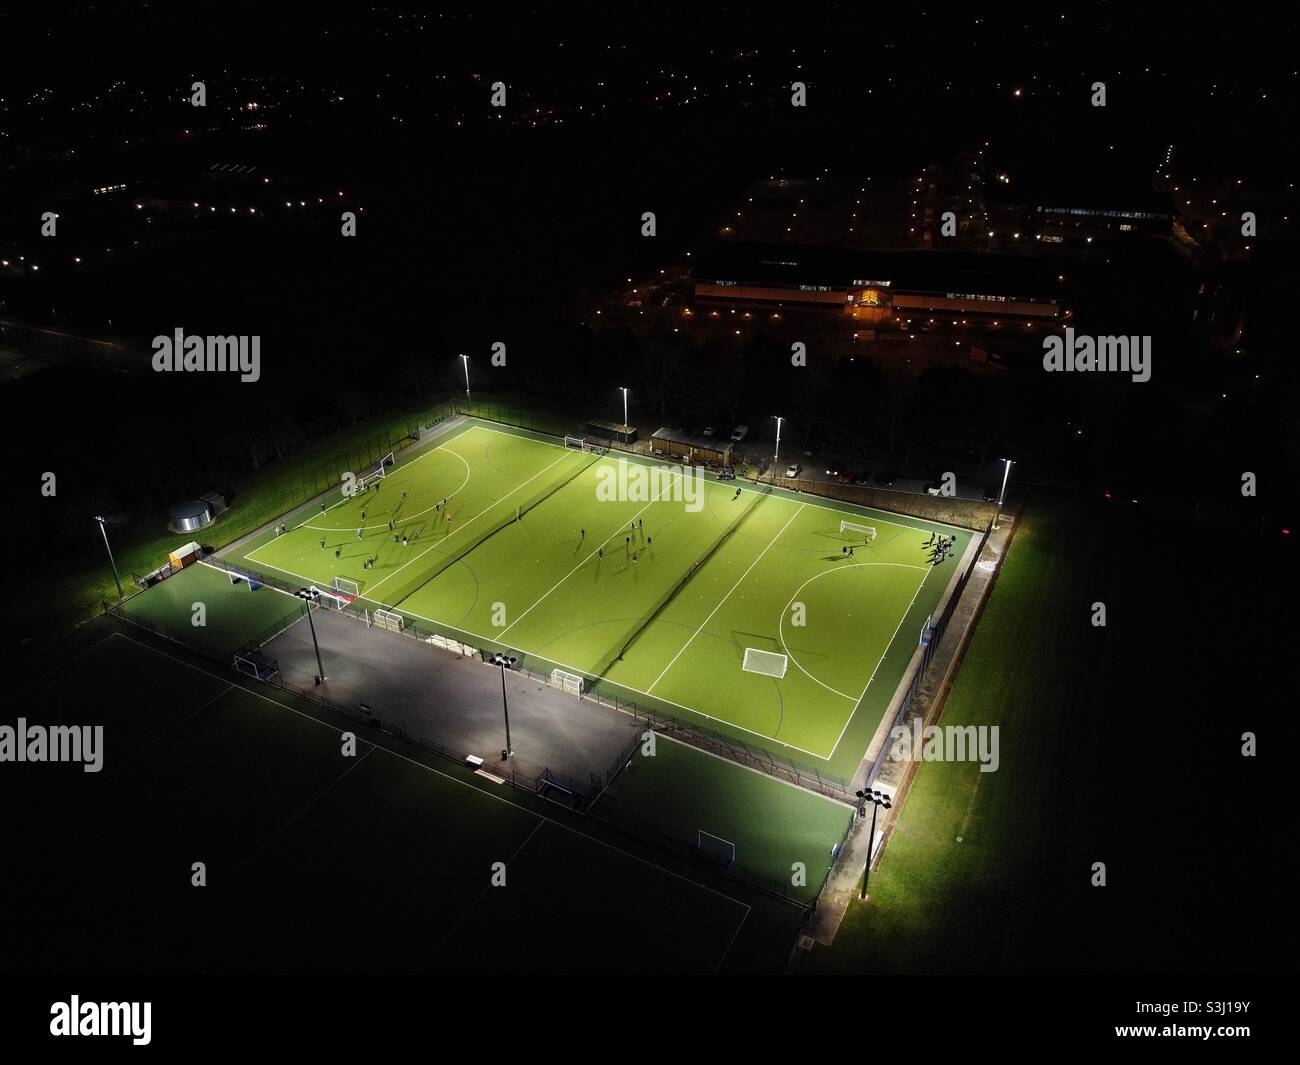 Floodlit local football pitch during training night Stock Photo